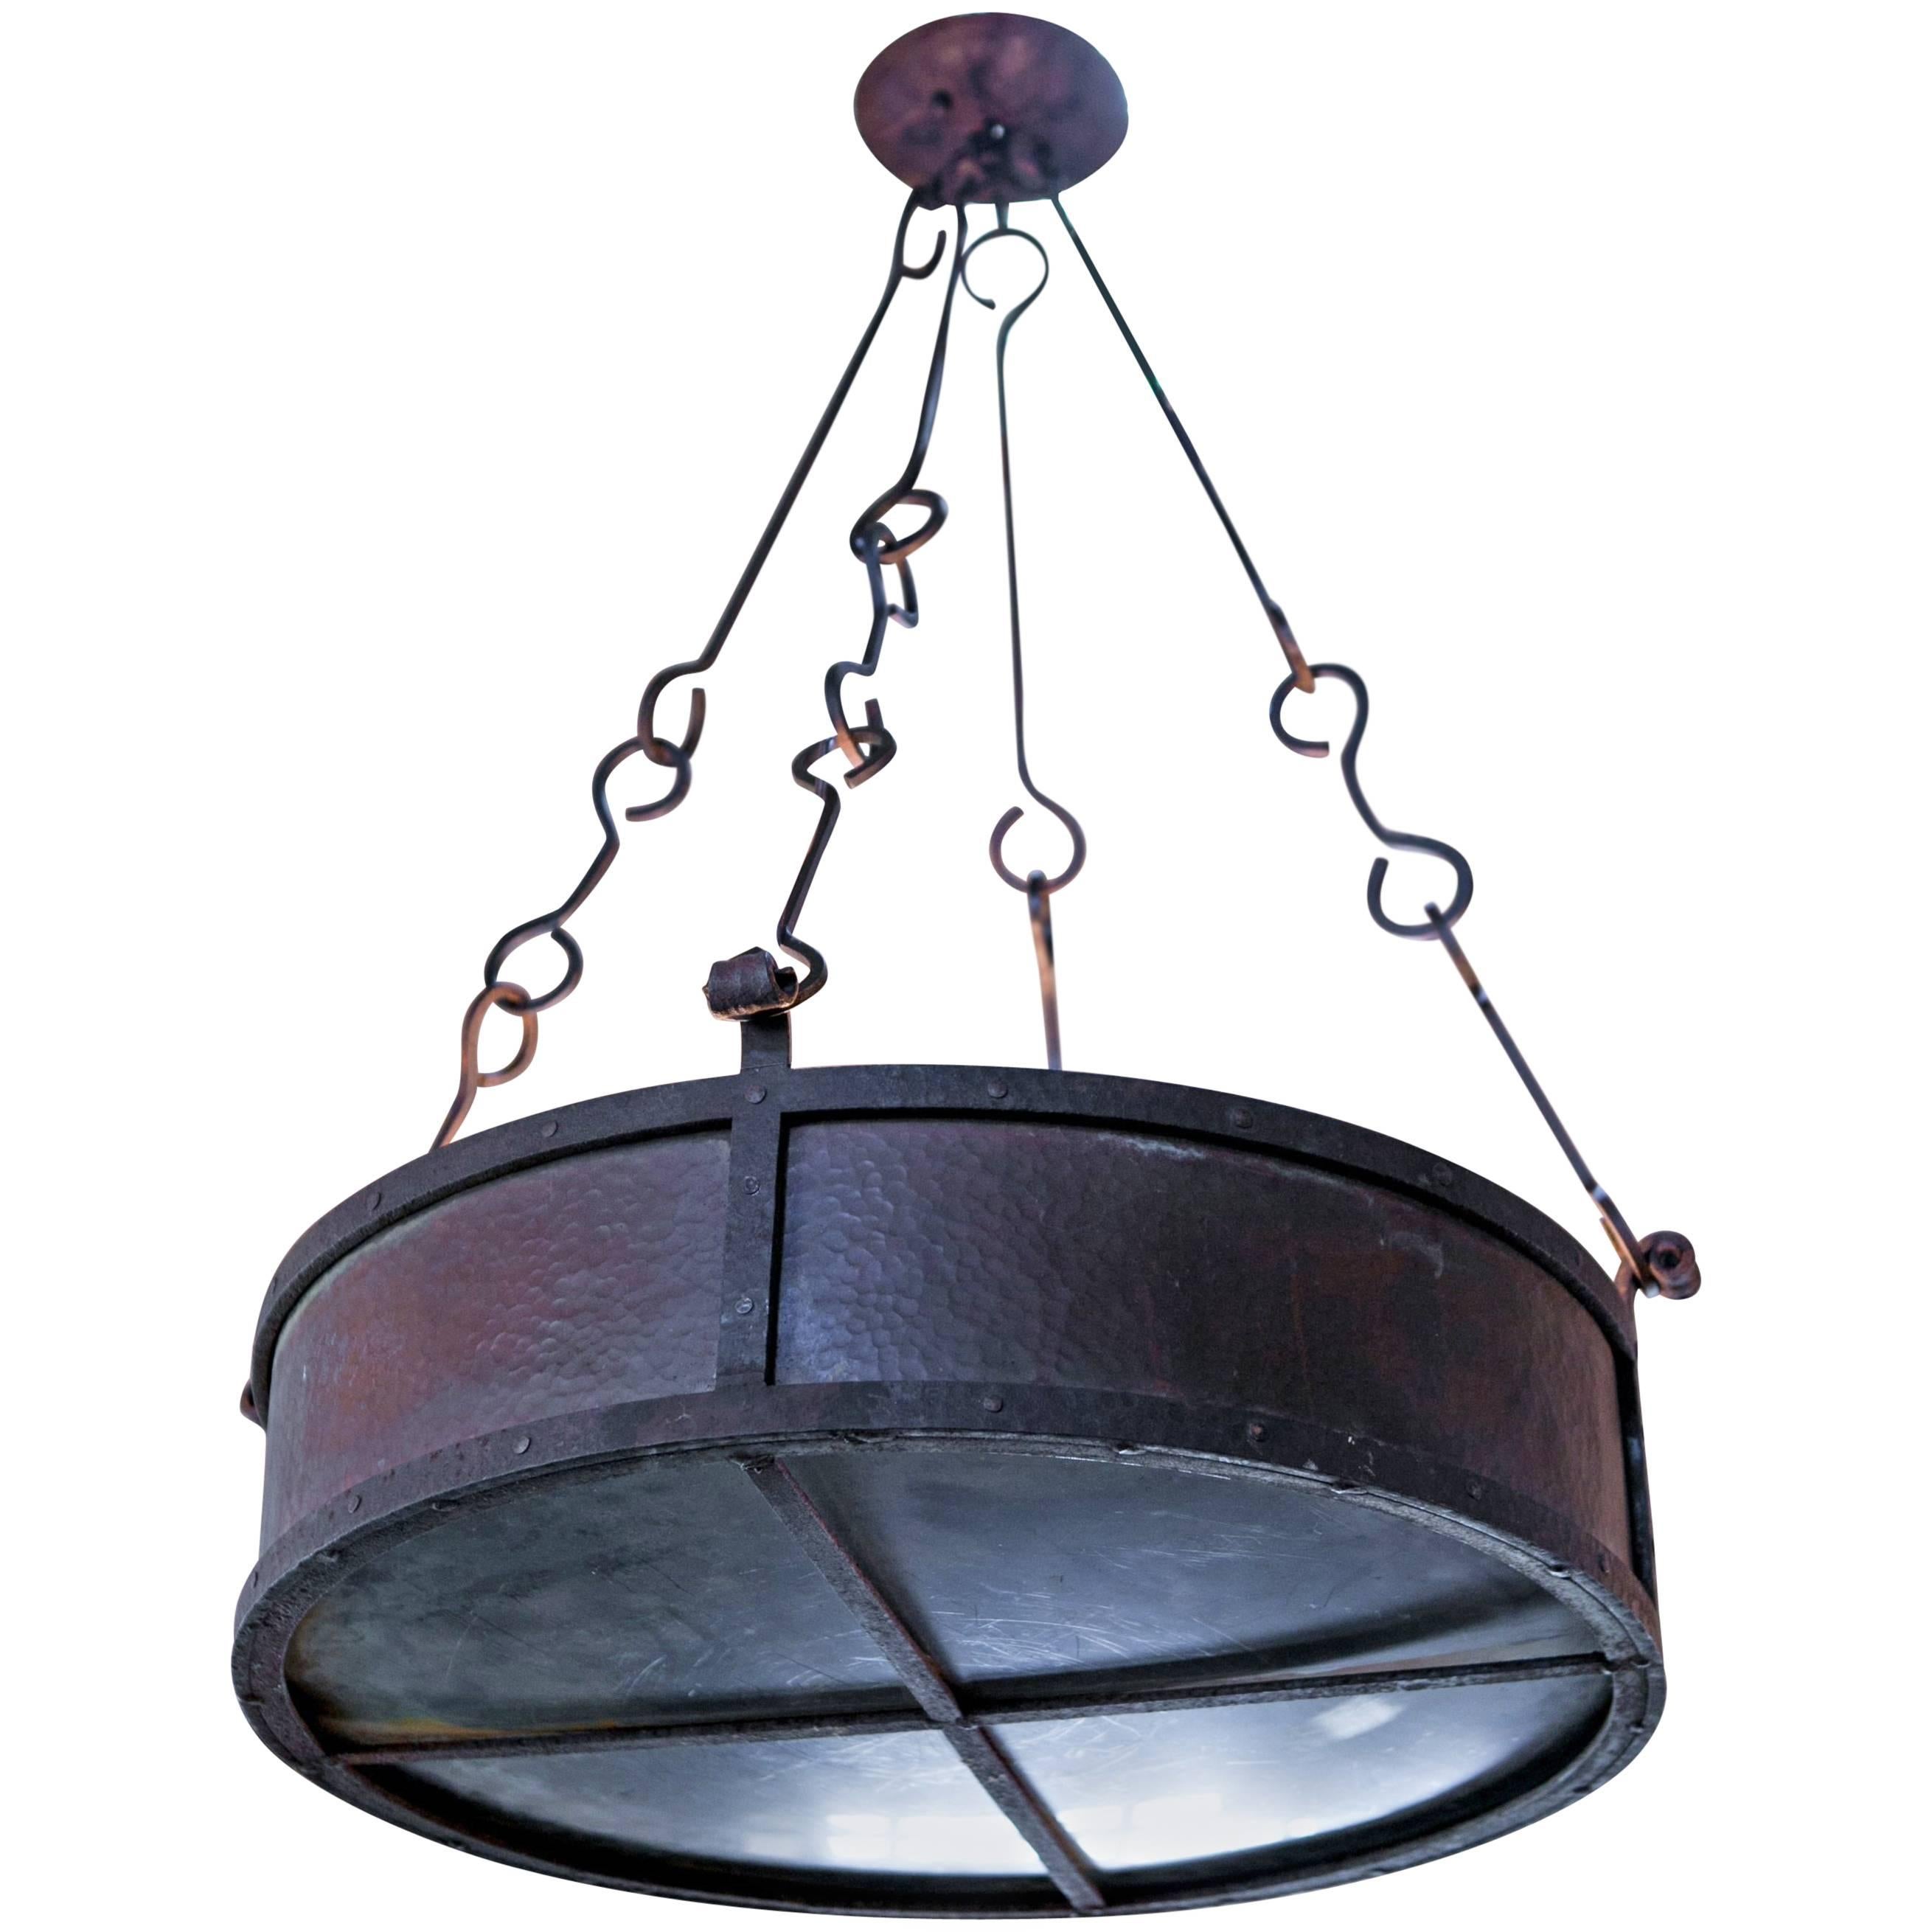 One of a Kind Hammered Copper and Iron Round Light from France, circa 1920